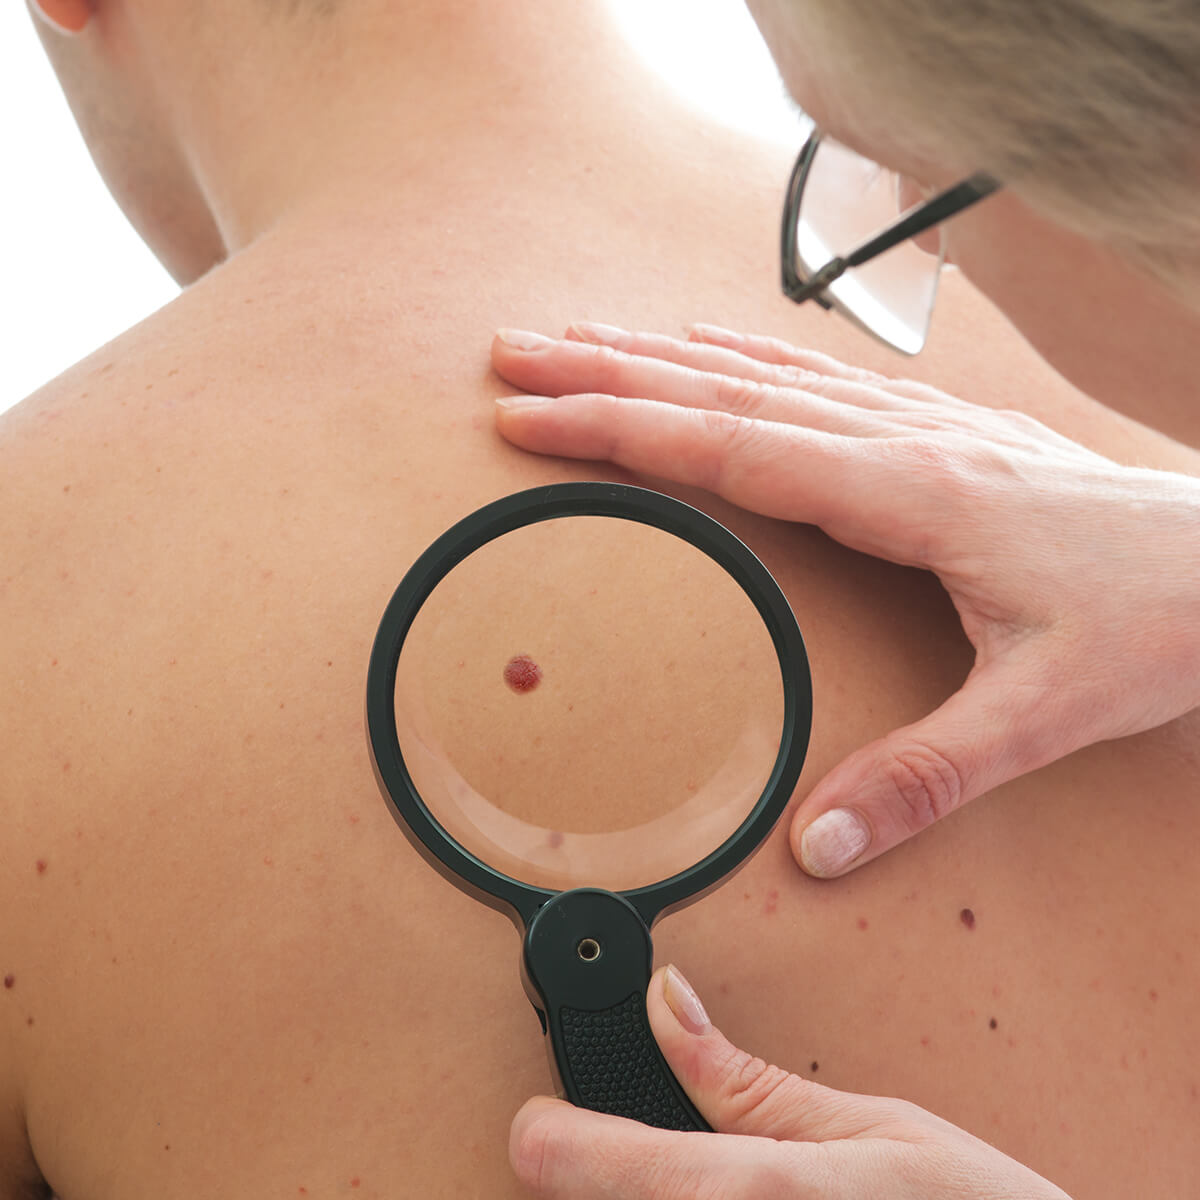 Mole Removal Methods and What Should You Know About Them?